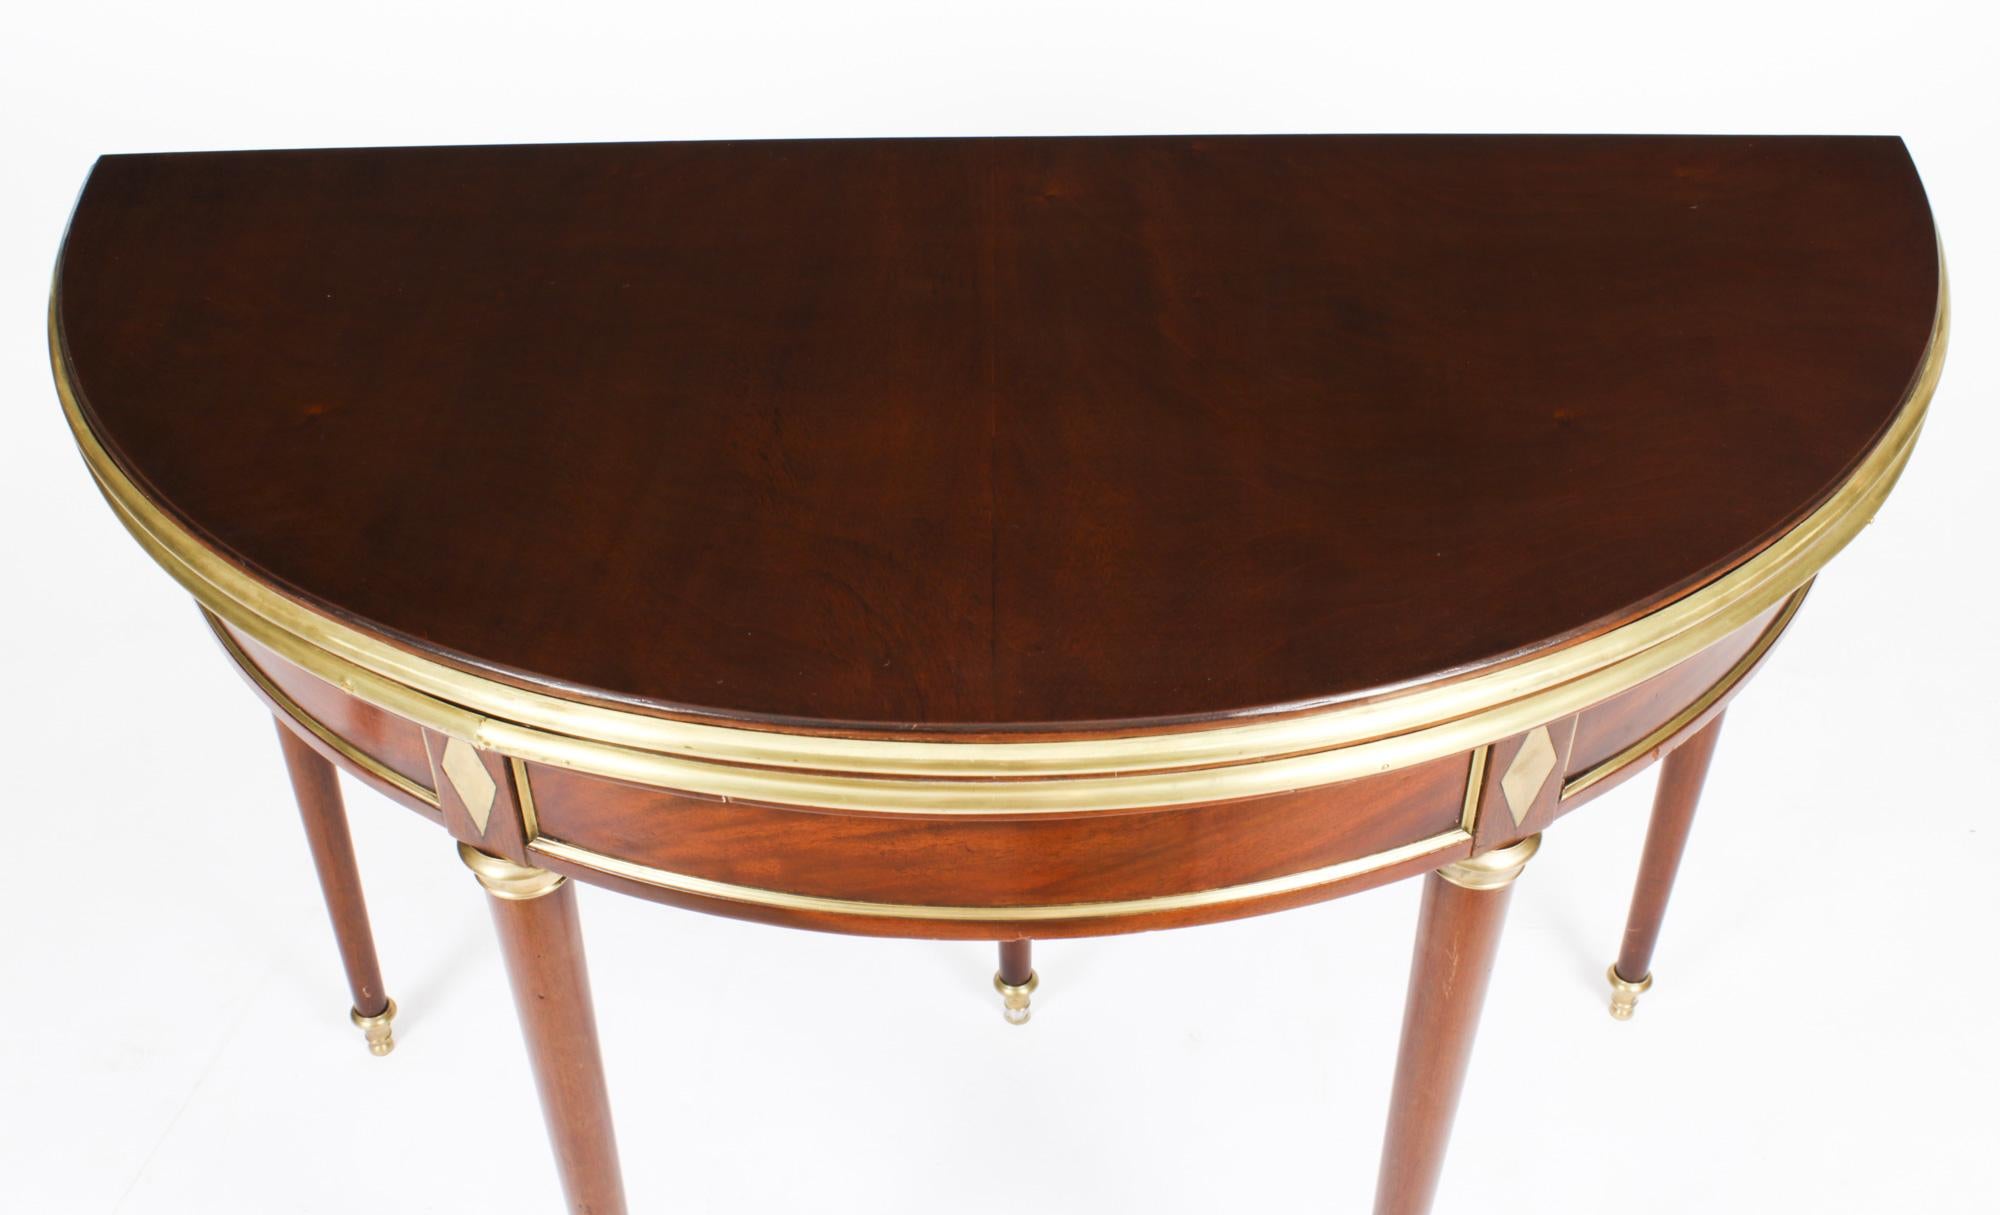 Antique French Directoire Brass Mounted Card Table Early 19th Century In Good Condition For Sale In London, GB